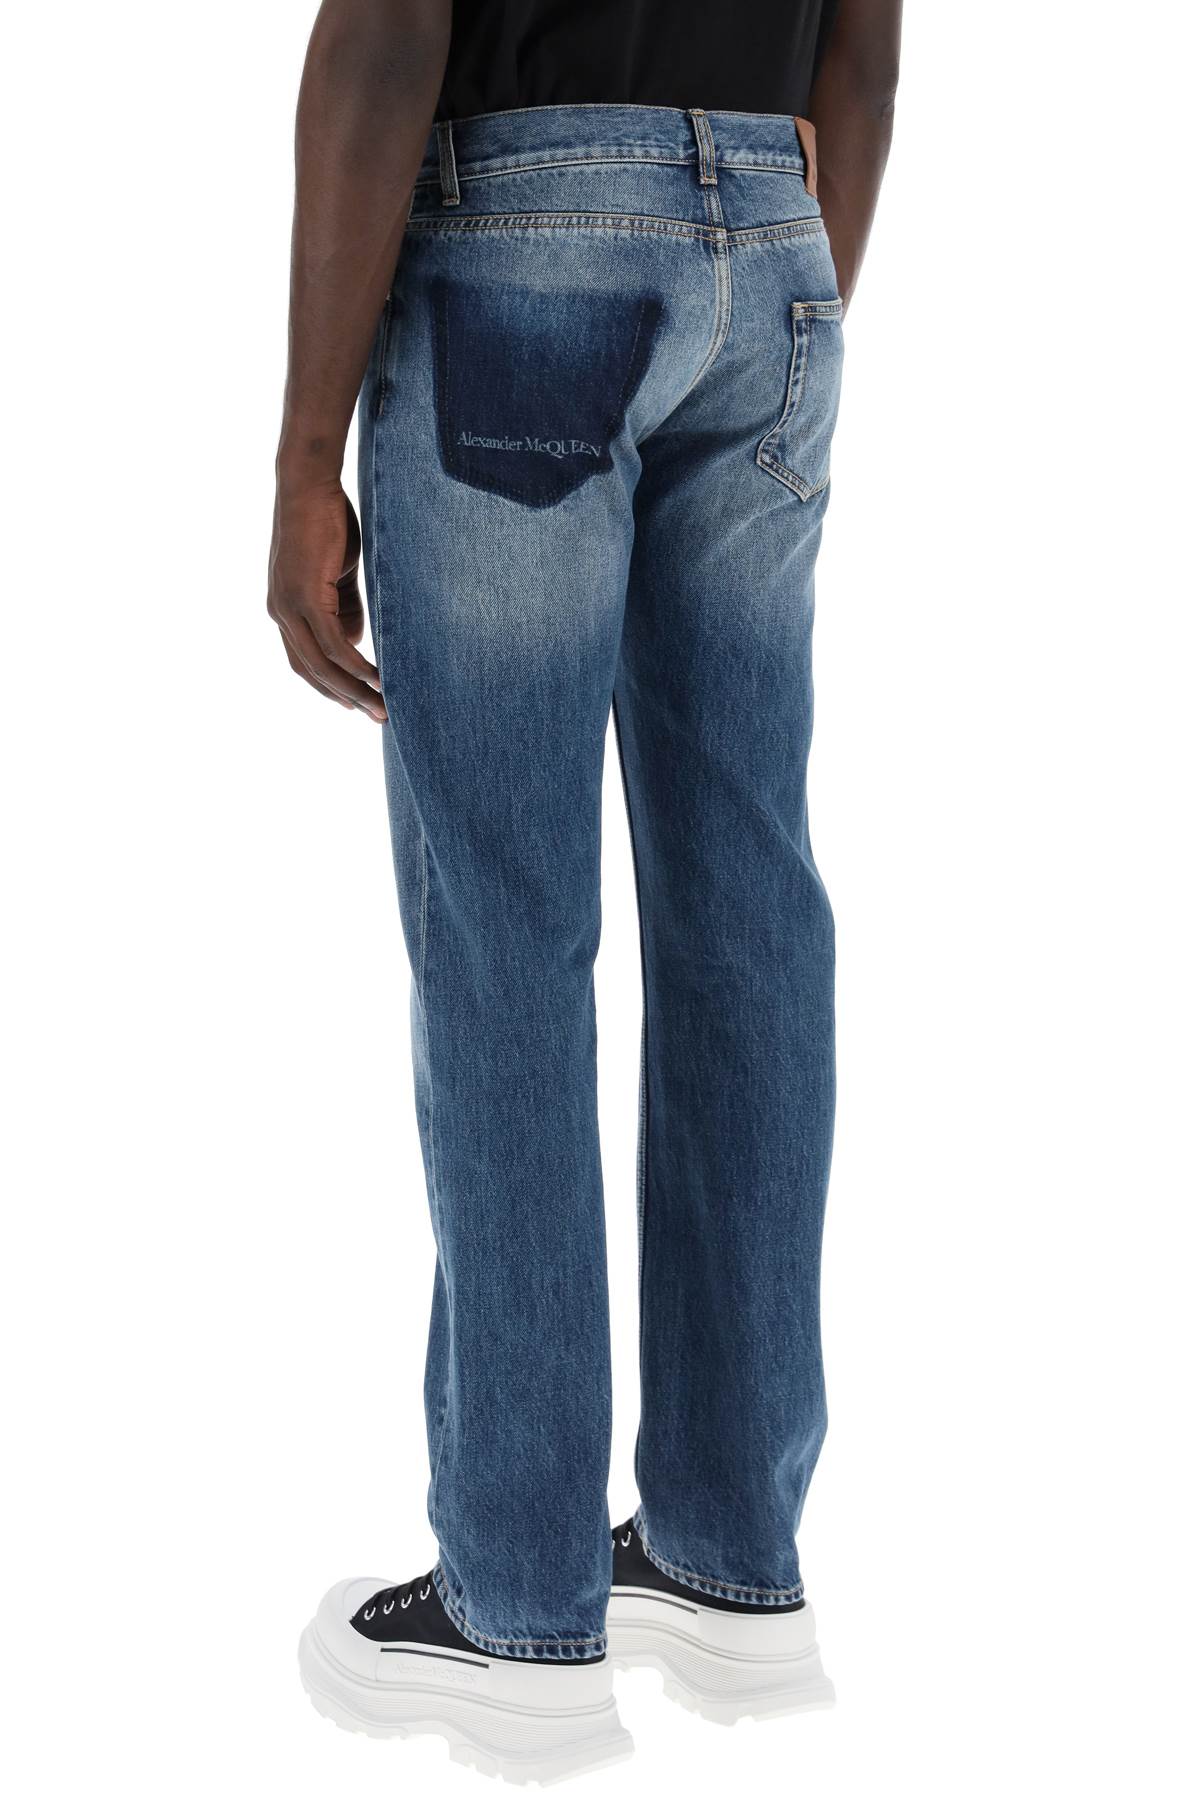 Shop Alexander Mcqueen Straight Leg Jeans With Faux Pocket On The Back. In Blue